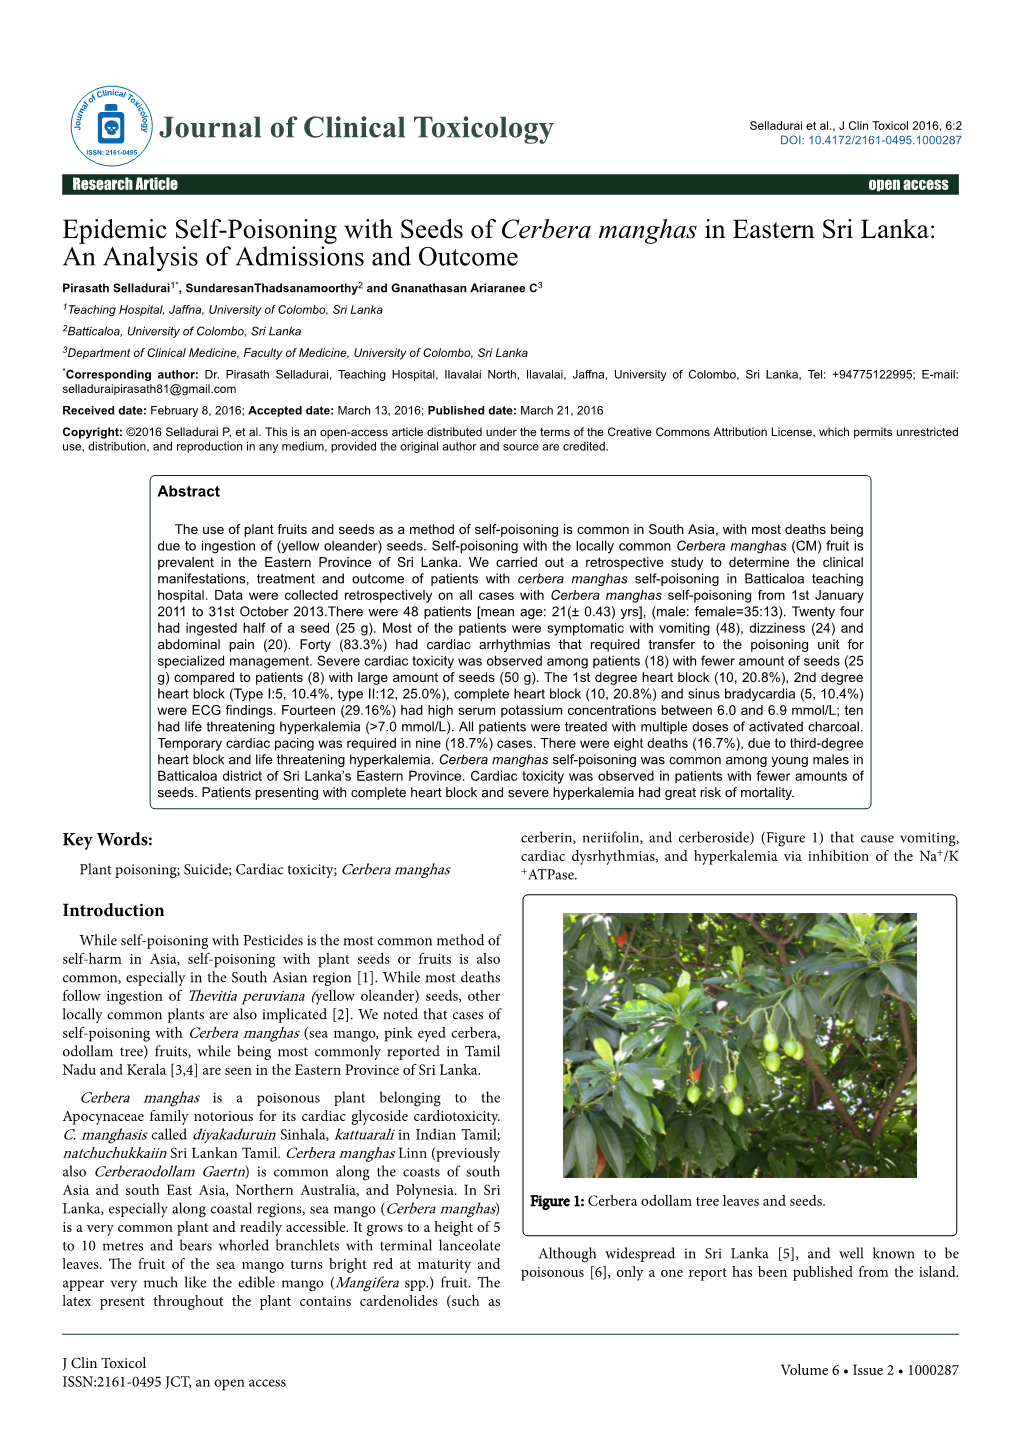 Epidemic Self-Poisoning with Seeds of Cerbera Manghas in Eastern Sri